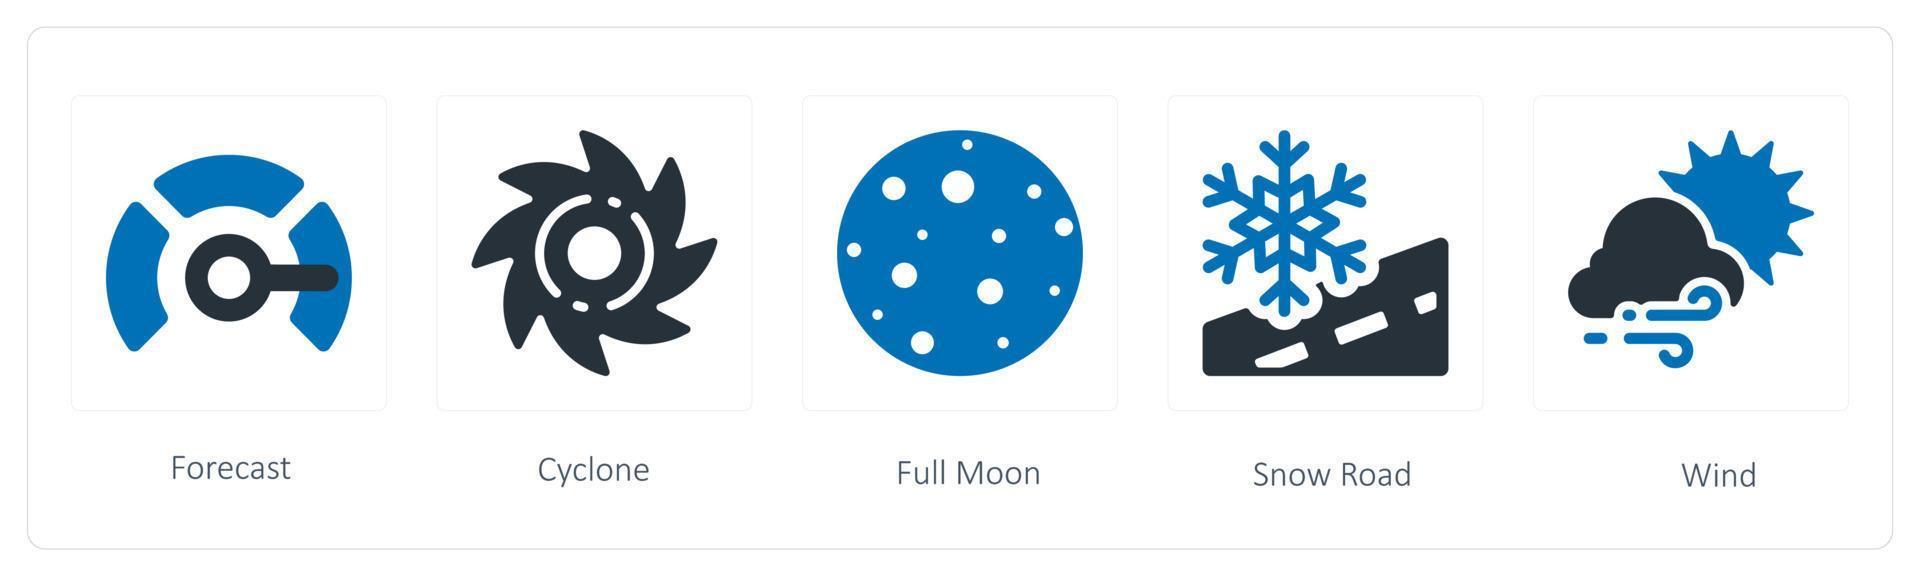 A set of 5 weather icons such as forecast, cyclone and full moon vector